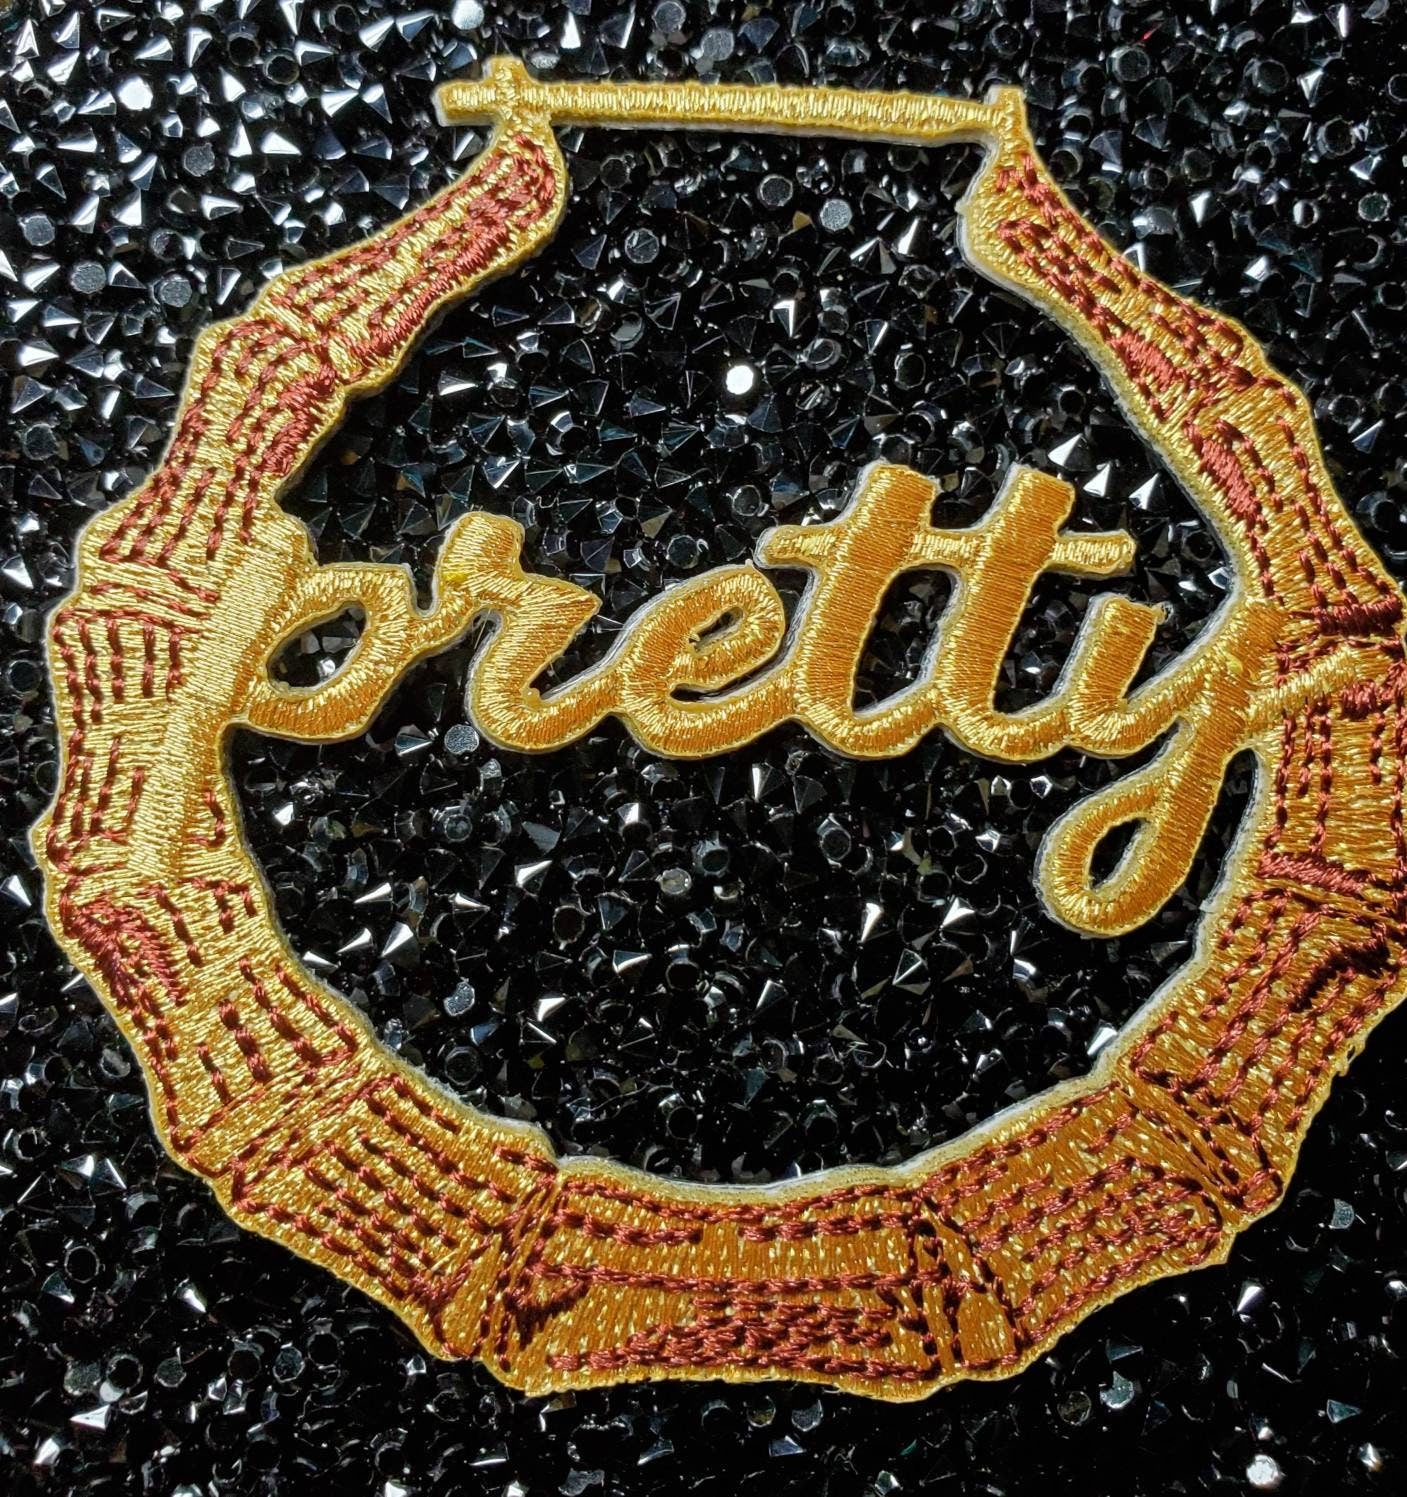 Gold Bamboo 1-pc Earring "Pretty" Patch, Hoop Earrings Iron-on Embroidered Applique, Cool Patches for Clothing; Door Knocker, 3-inches